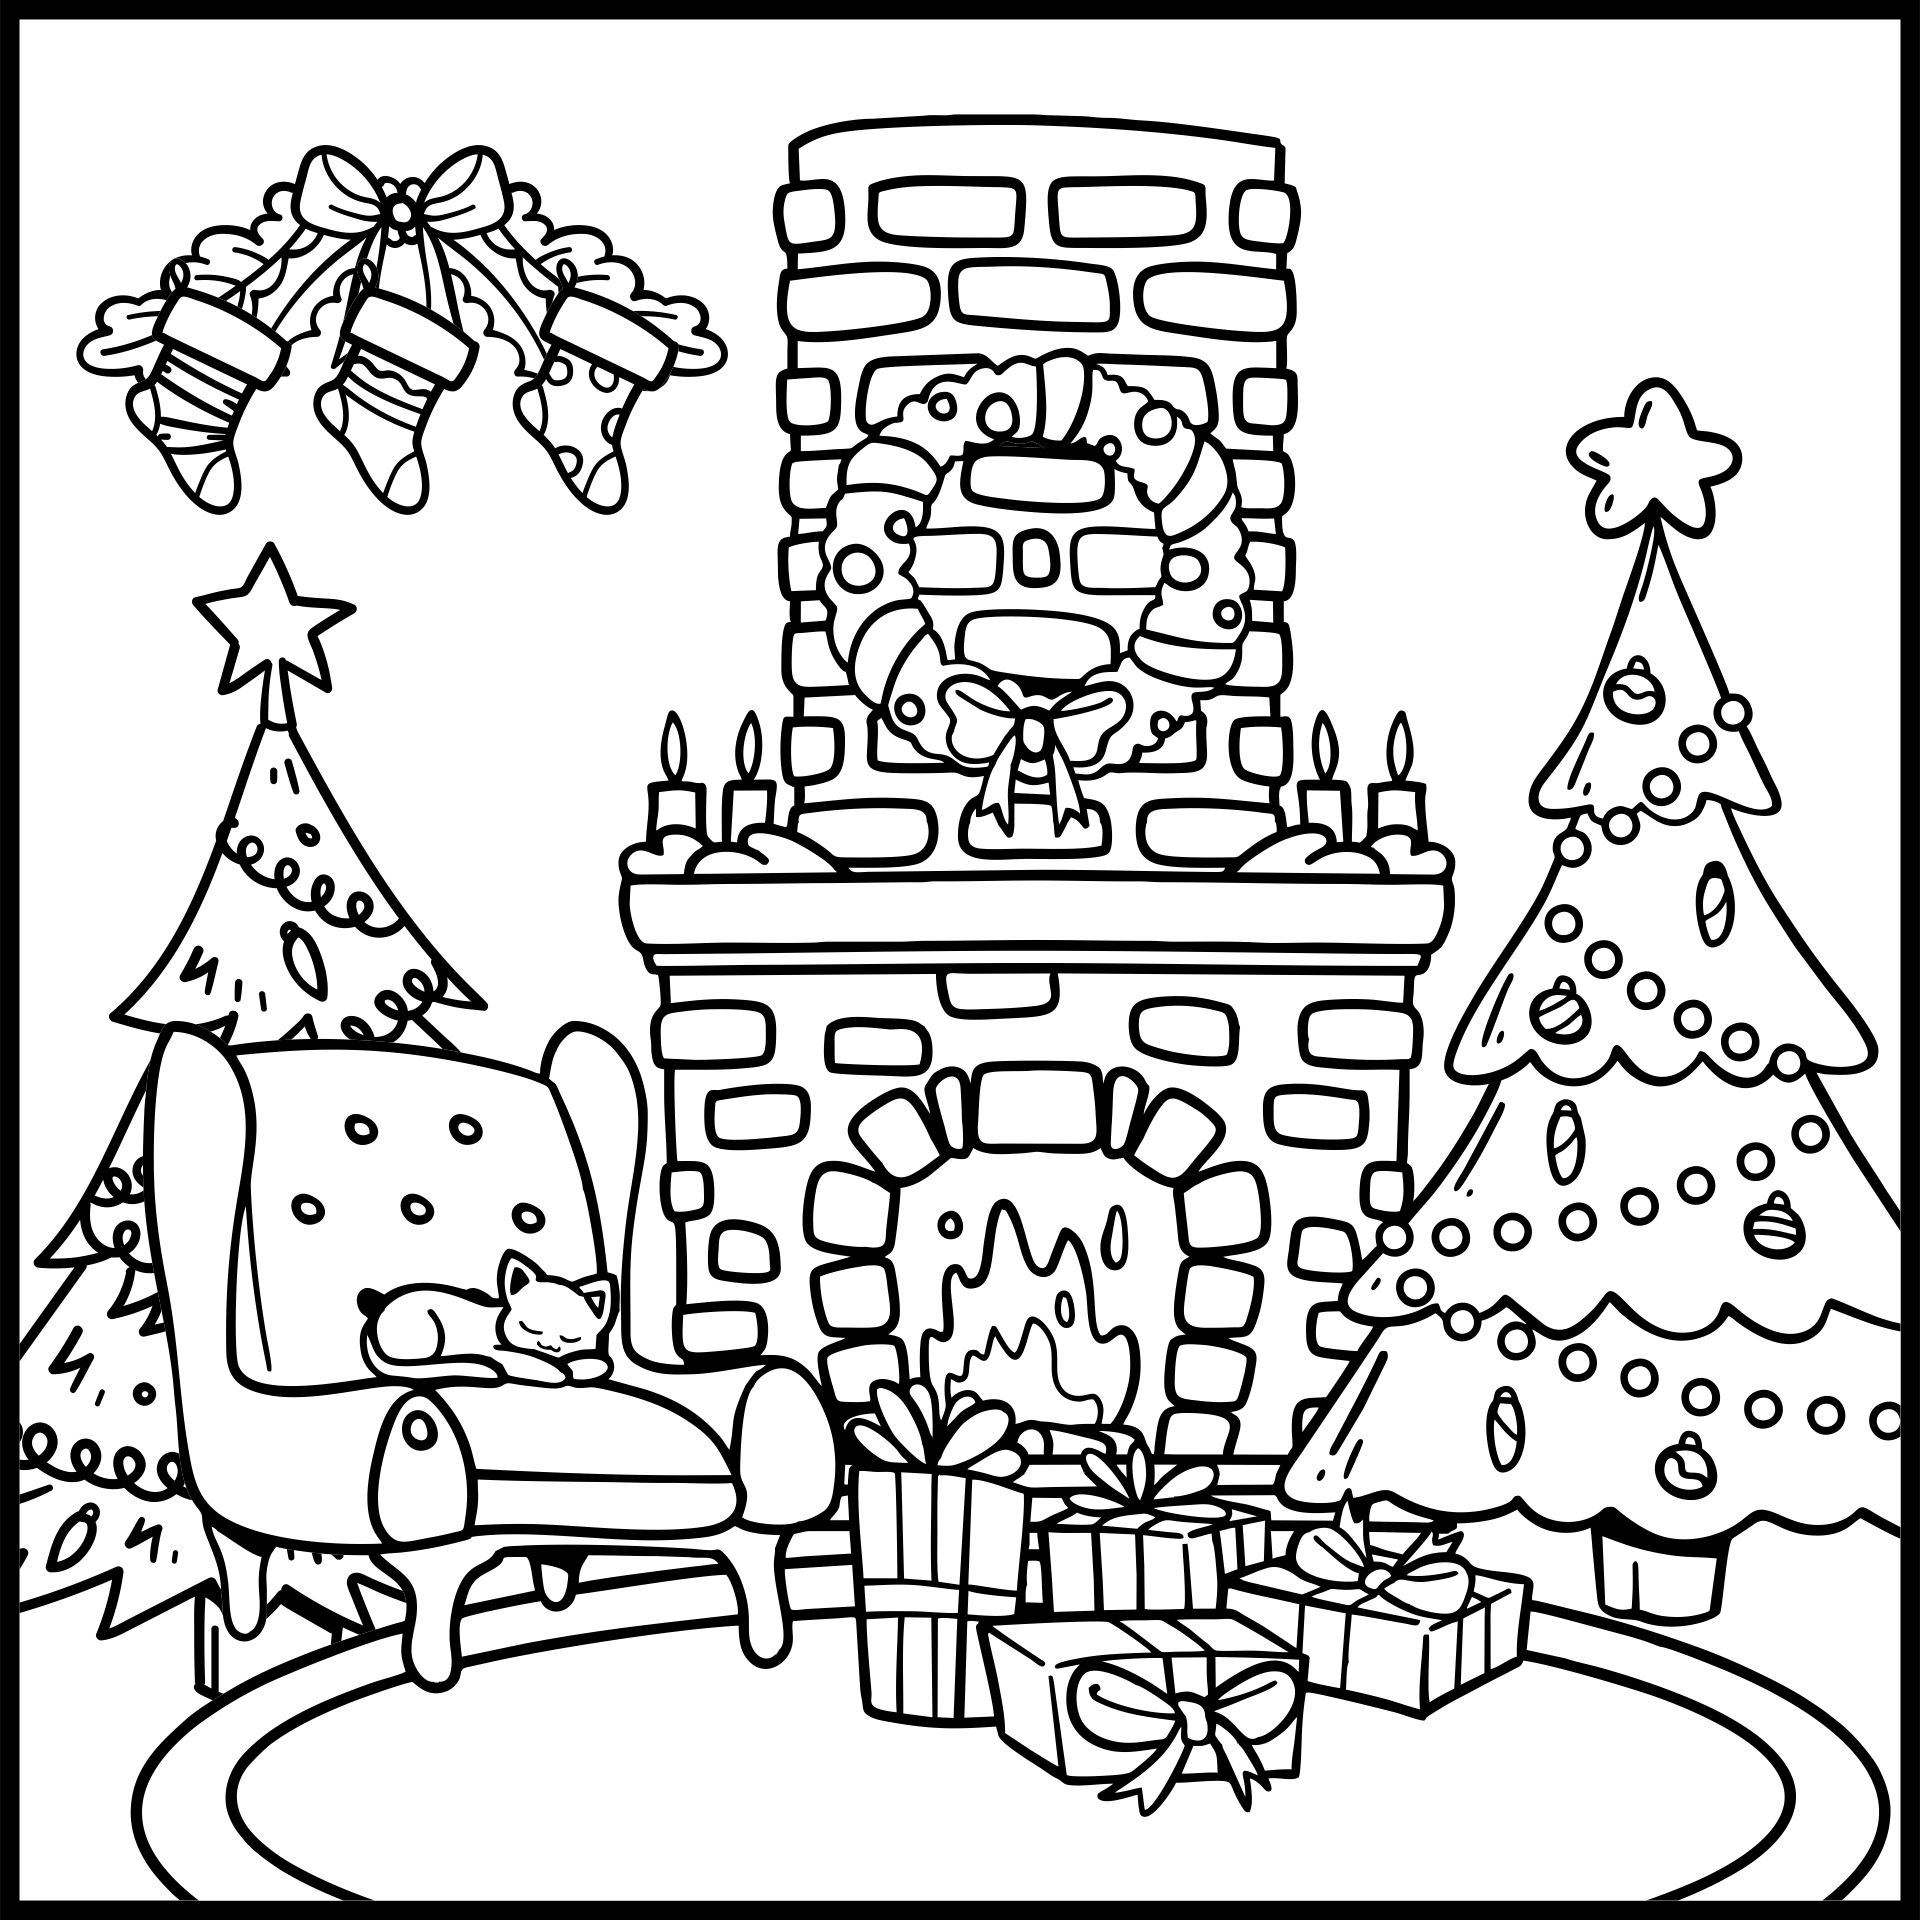 10 Best Printable Christmas Coloring Pages For Adults - printablee.com